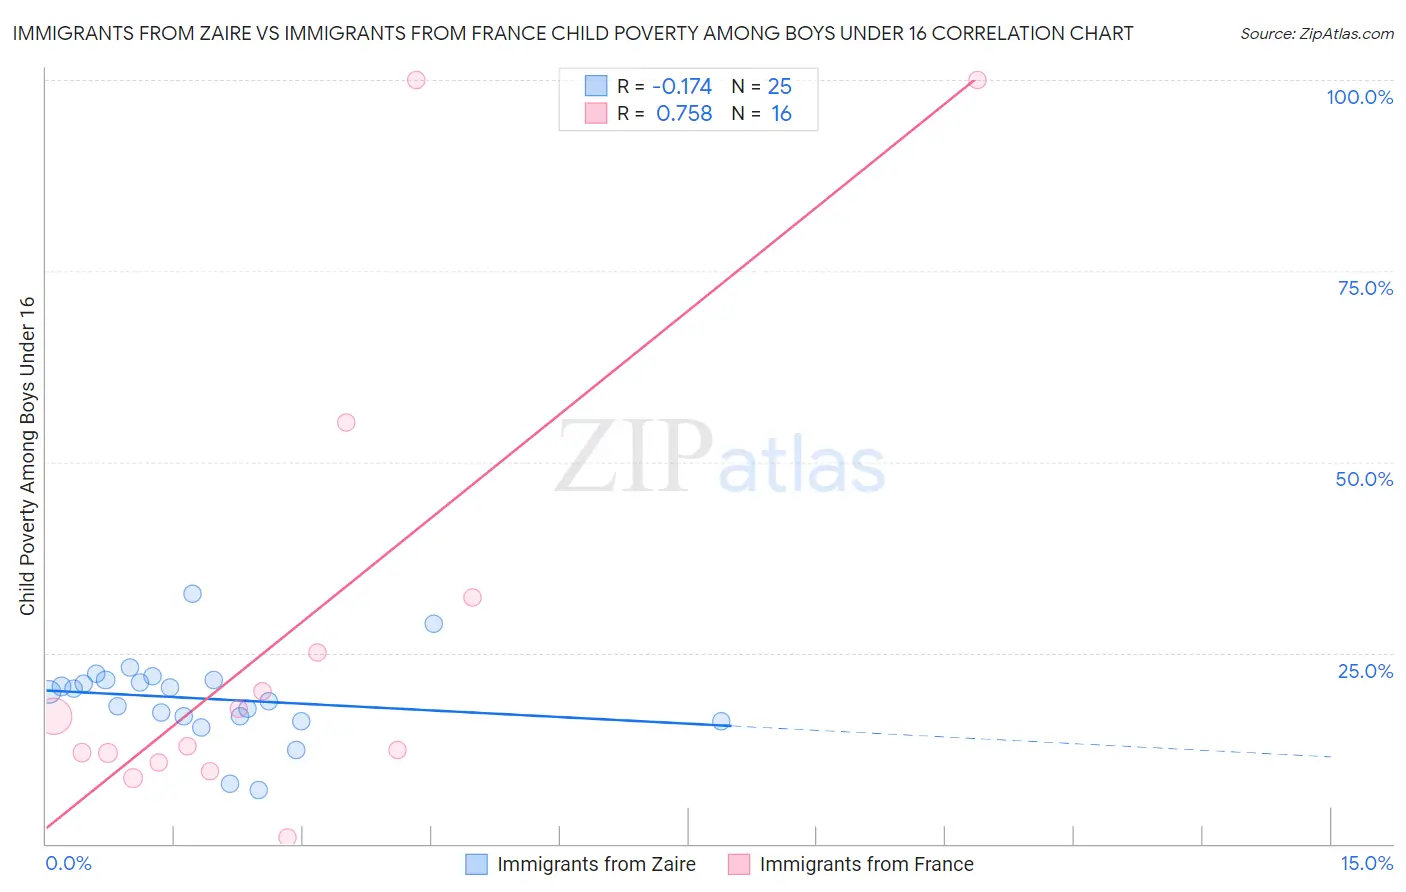 Immigrants from Zaire vs Immigrants from France Child Poverty Among Boys Under 16